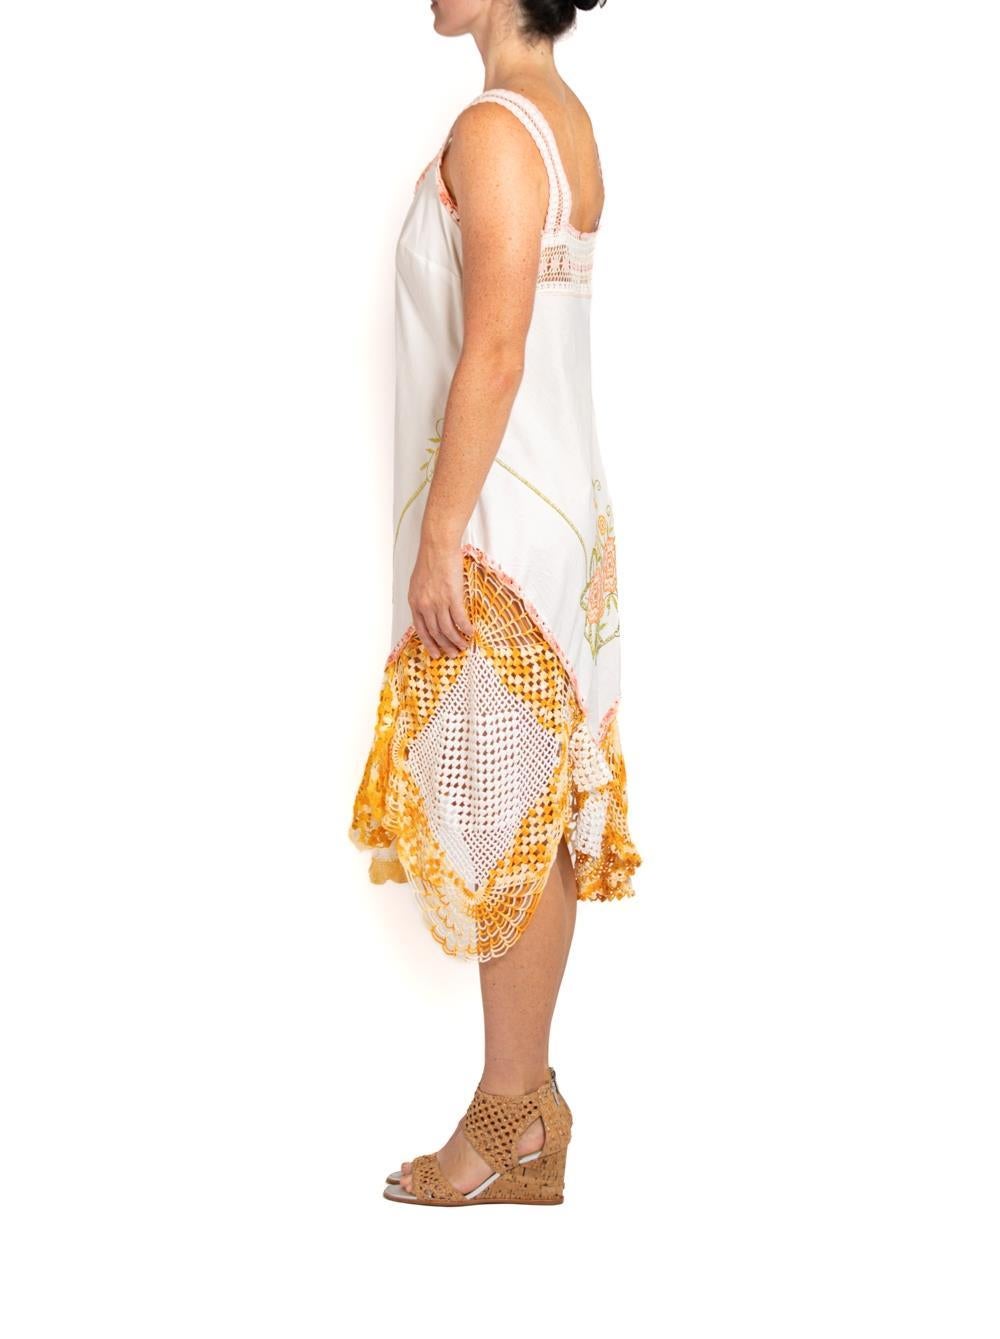 MORPHEW COLLECTION White  & Orange Cotton Blend With Handmade Crochet Dress For Sale 1